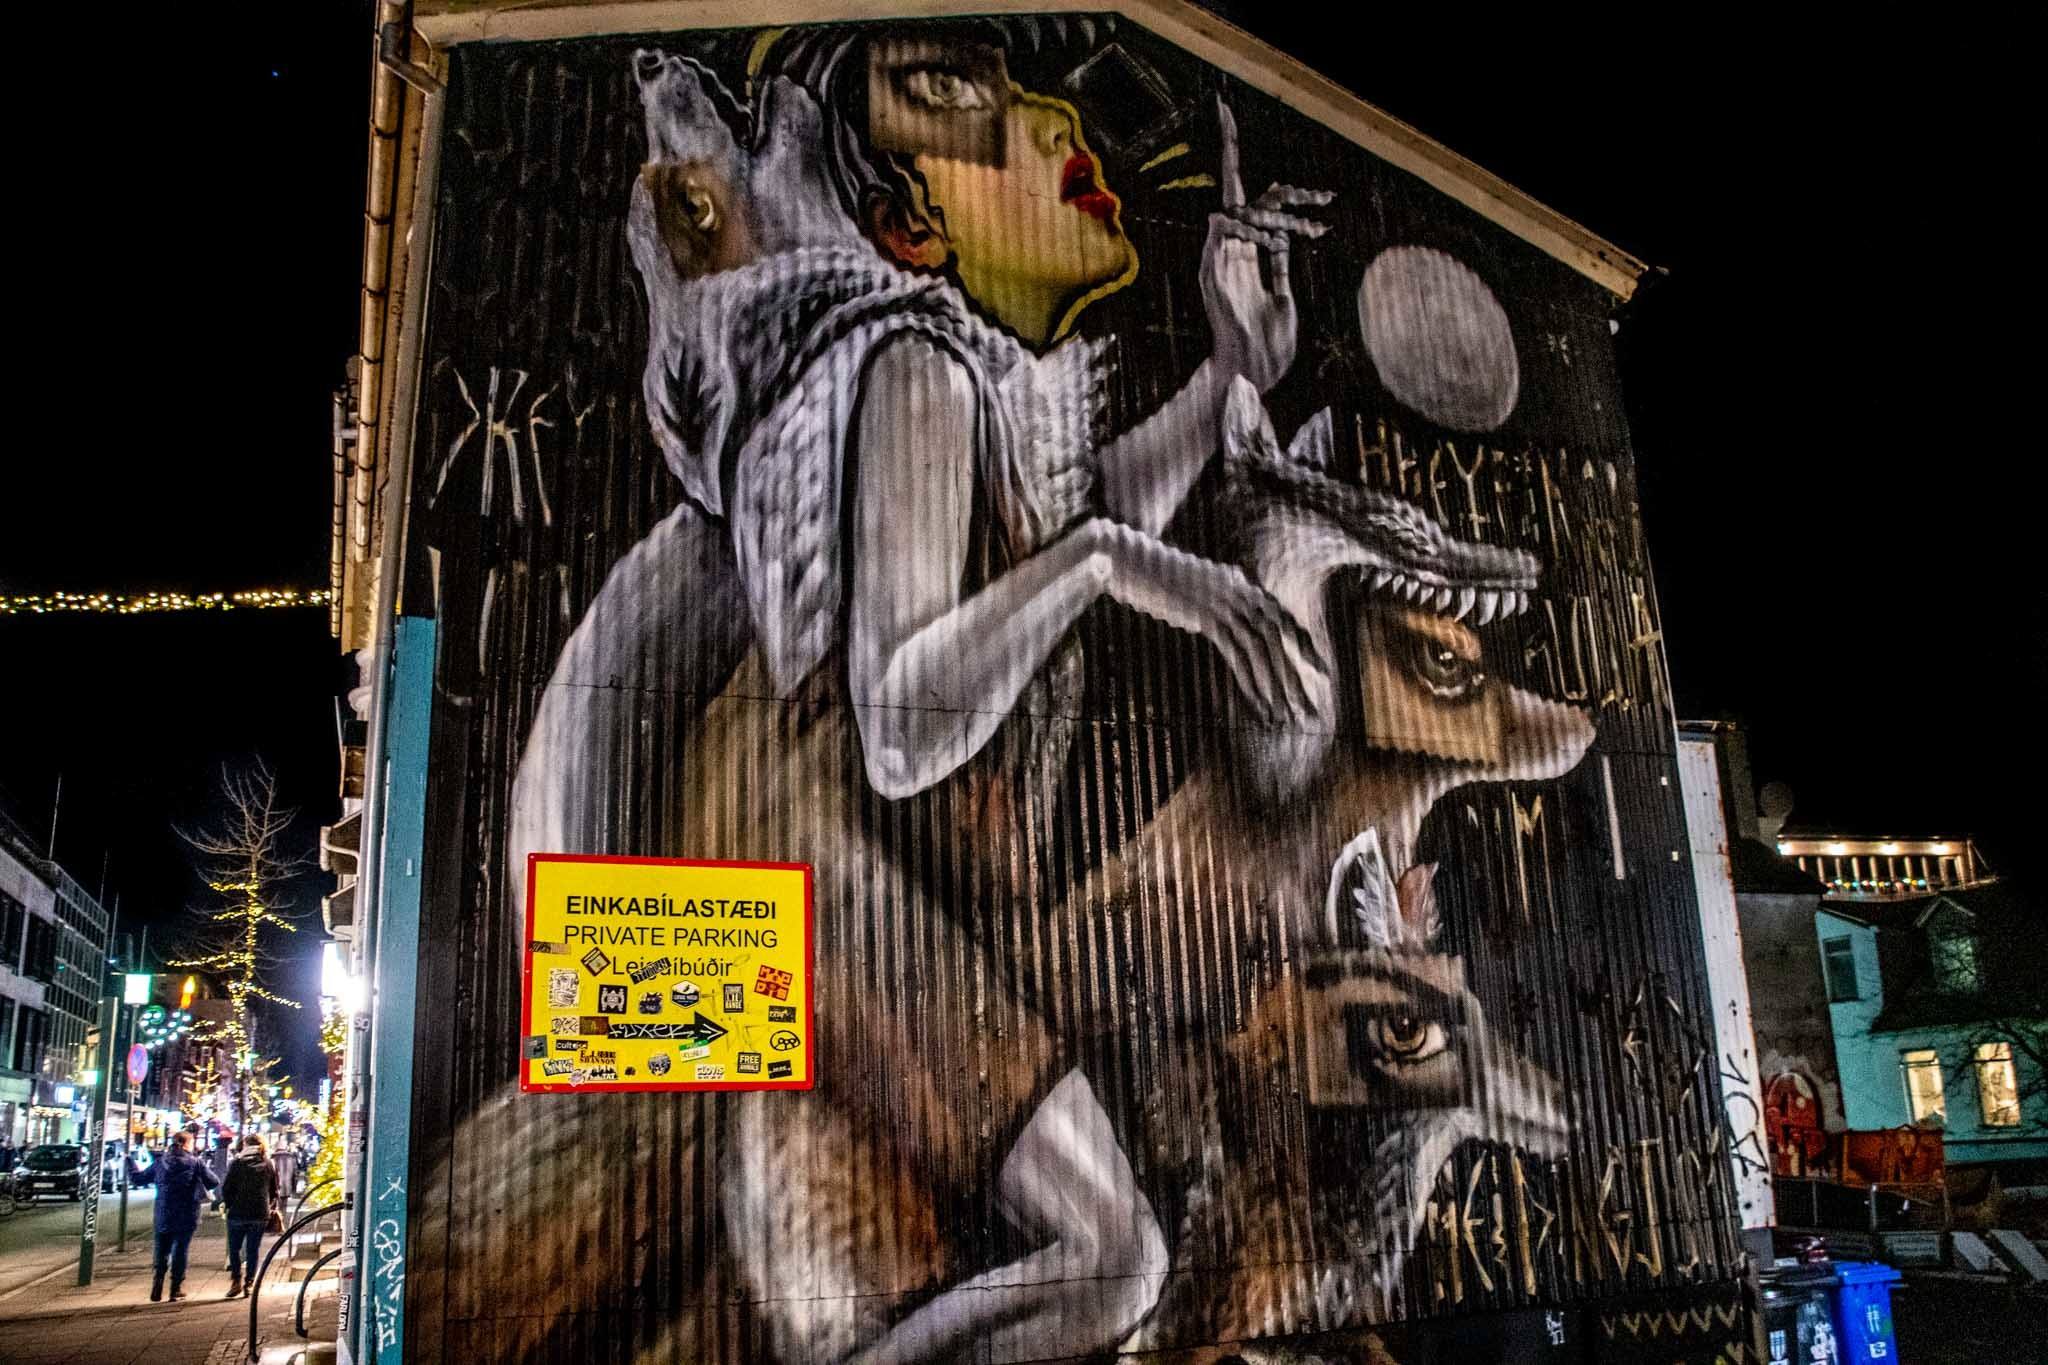 A street art mural featuring a woman and wolves